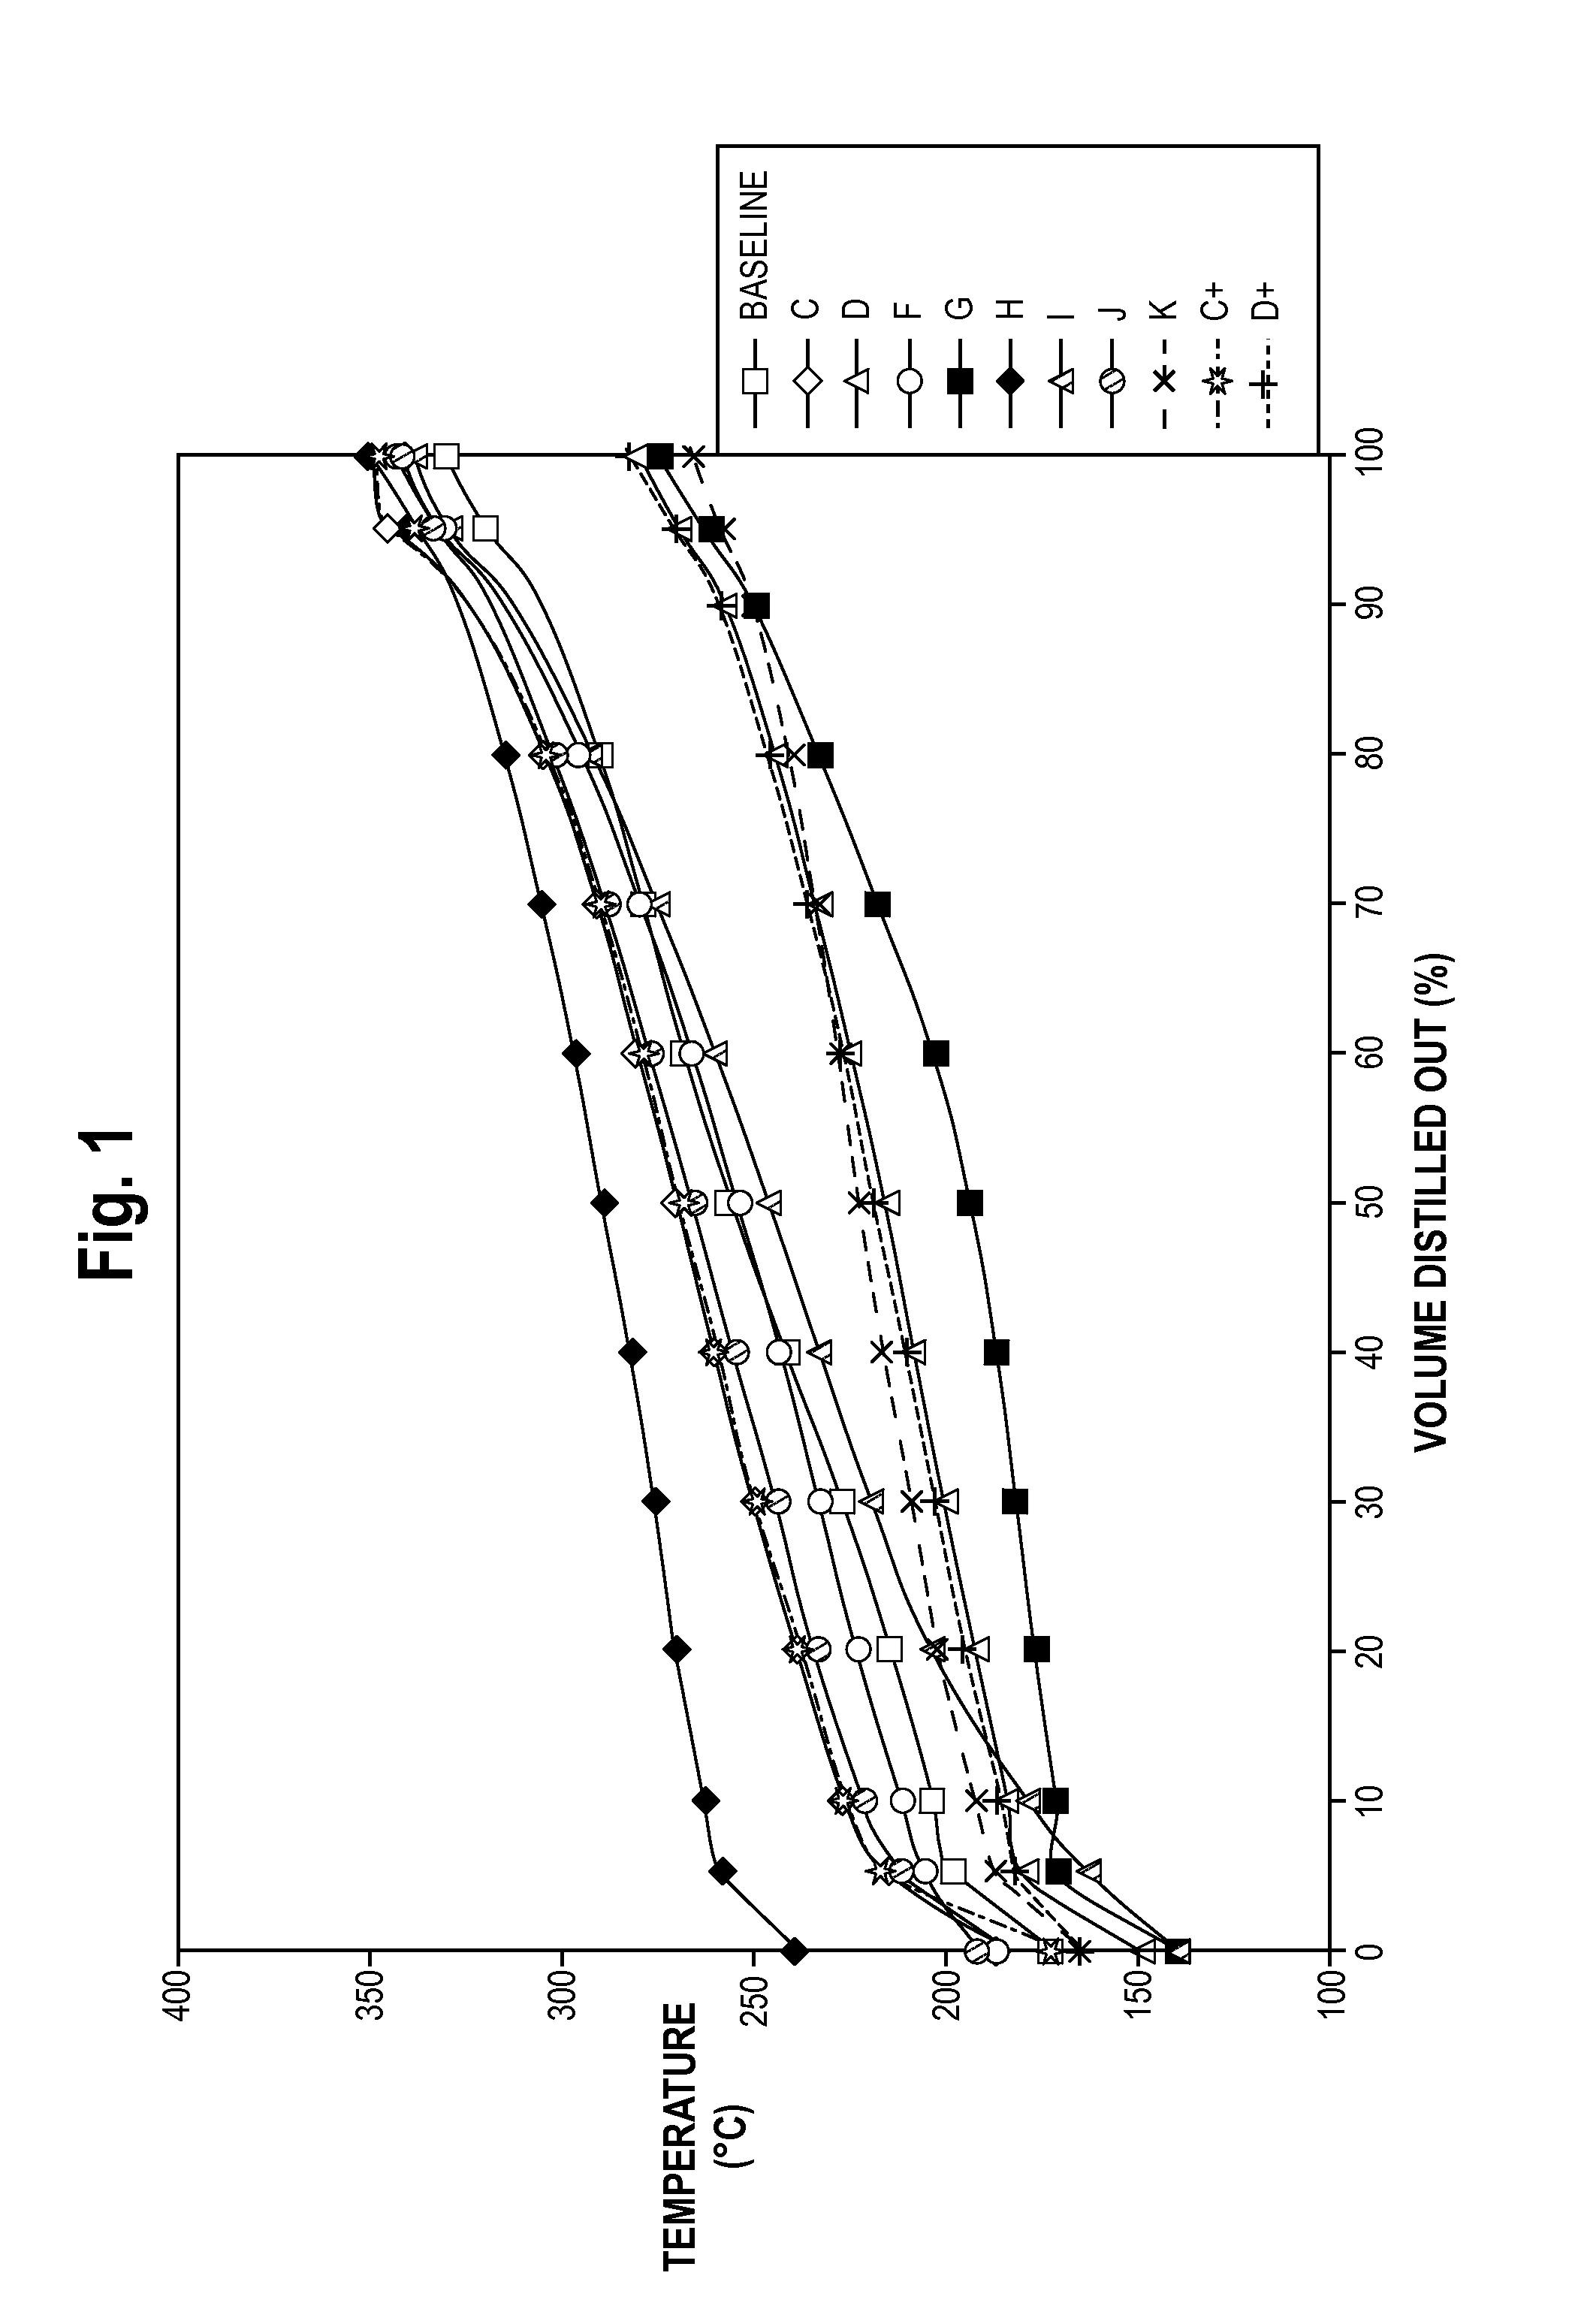 Composition and Method for Reducing NOx Emissions From Diesel Engines at Minimum Fuel Consumption